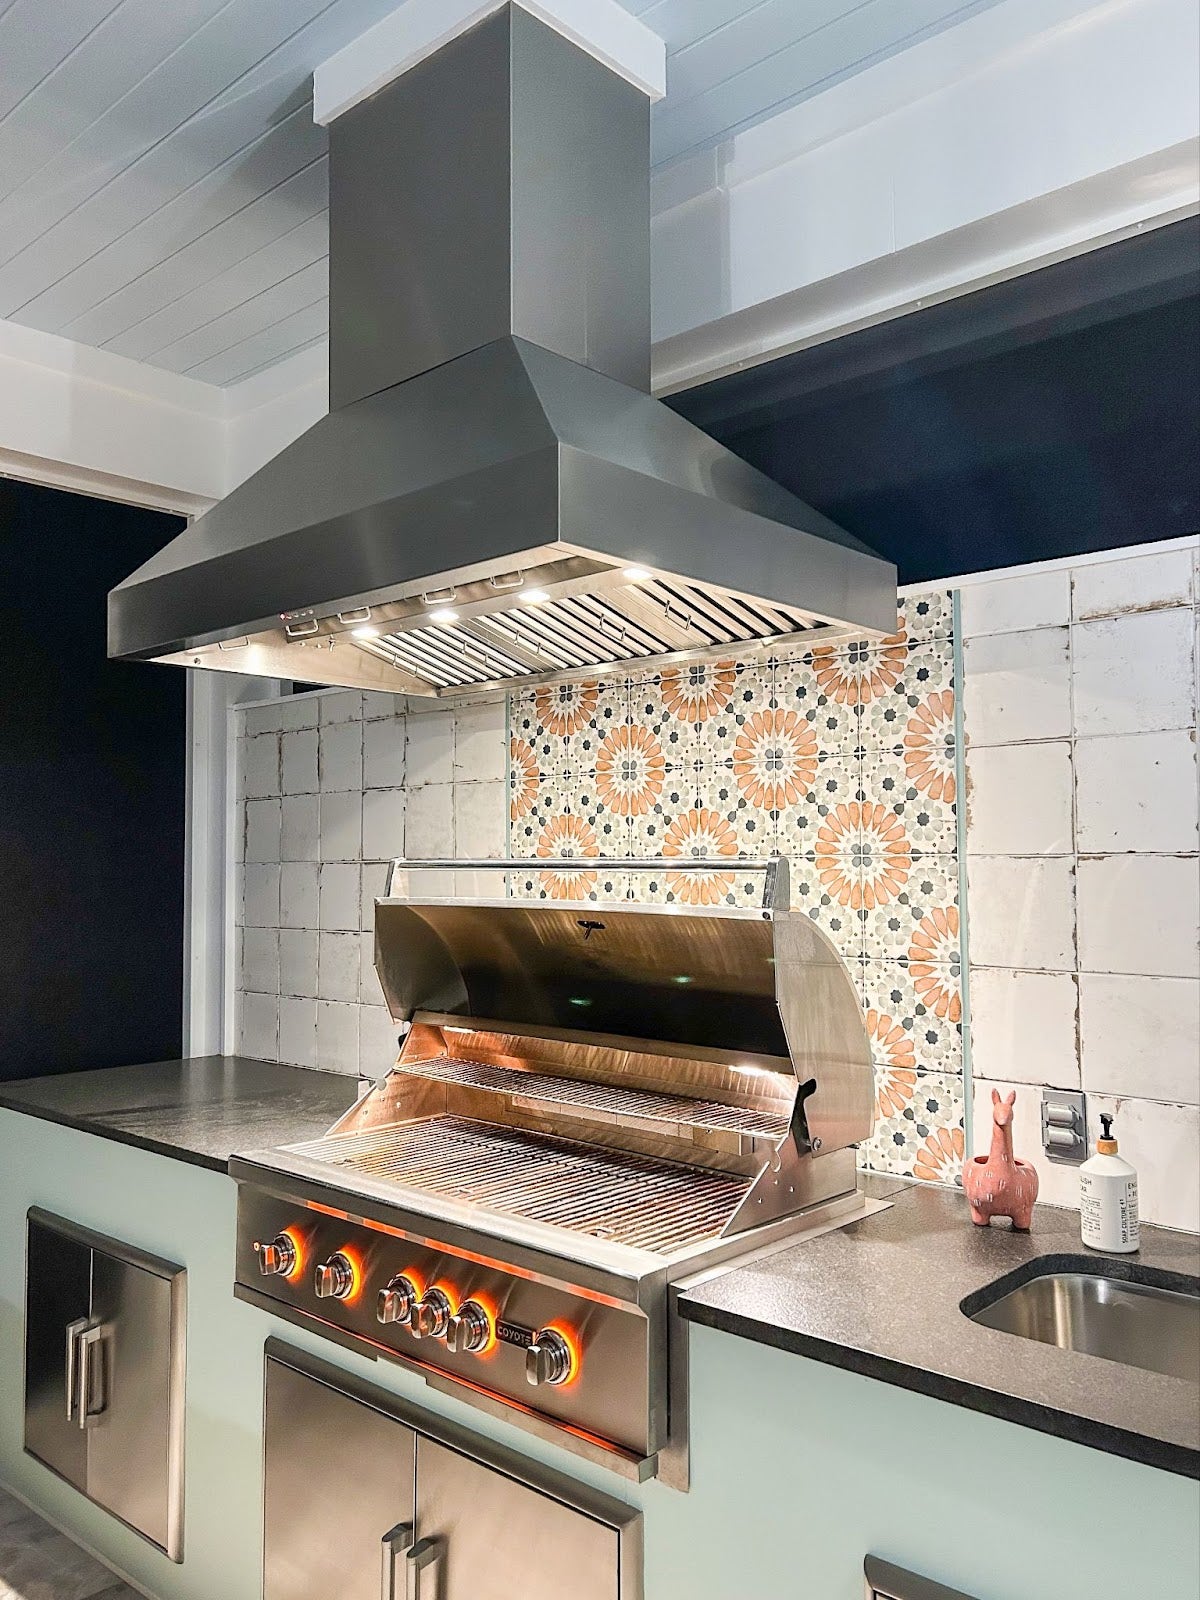 Stylish gourmet kitchen featuring a professional stainless steel grill and a colorful tile wall design. - Proline Range Hoods - prolinerangehoods.com 